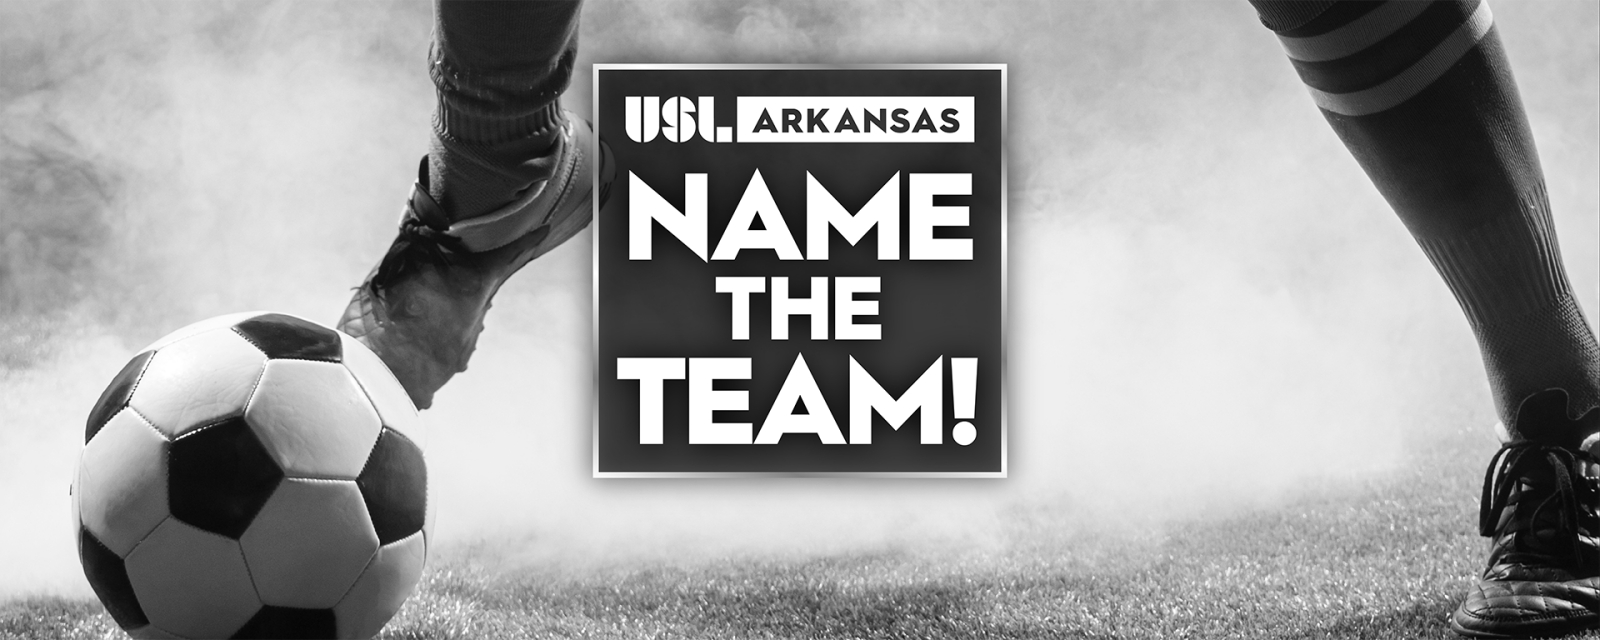 Your Voice, Your Team: Why Community Input is Vital in Naming Northwest Arkansas's First Professional Soccer Team featured image